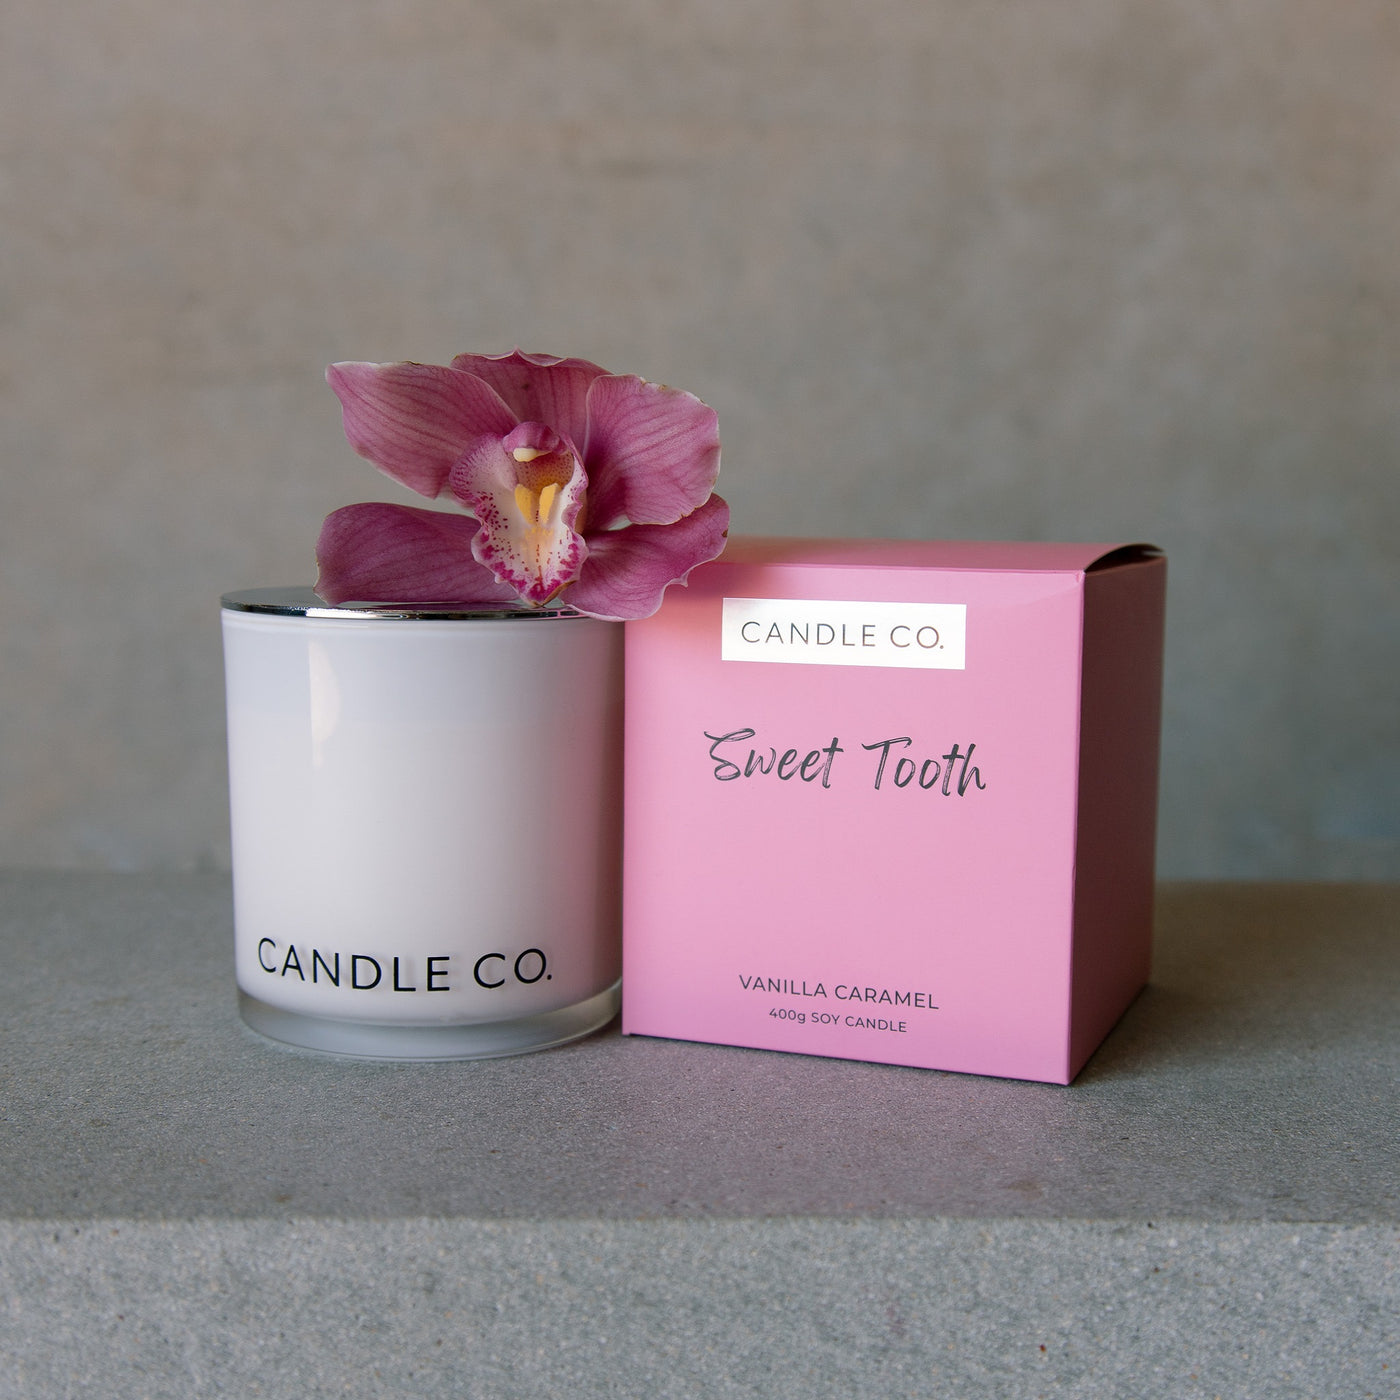 Candle Co Sweet Tooth Vanilla Caramel 400g Scented Candle Pink